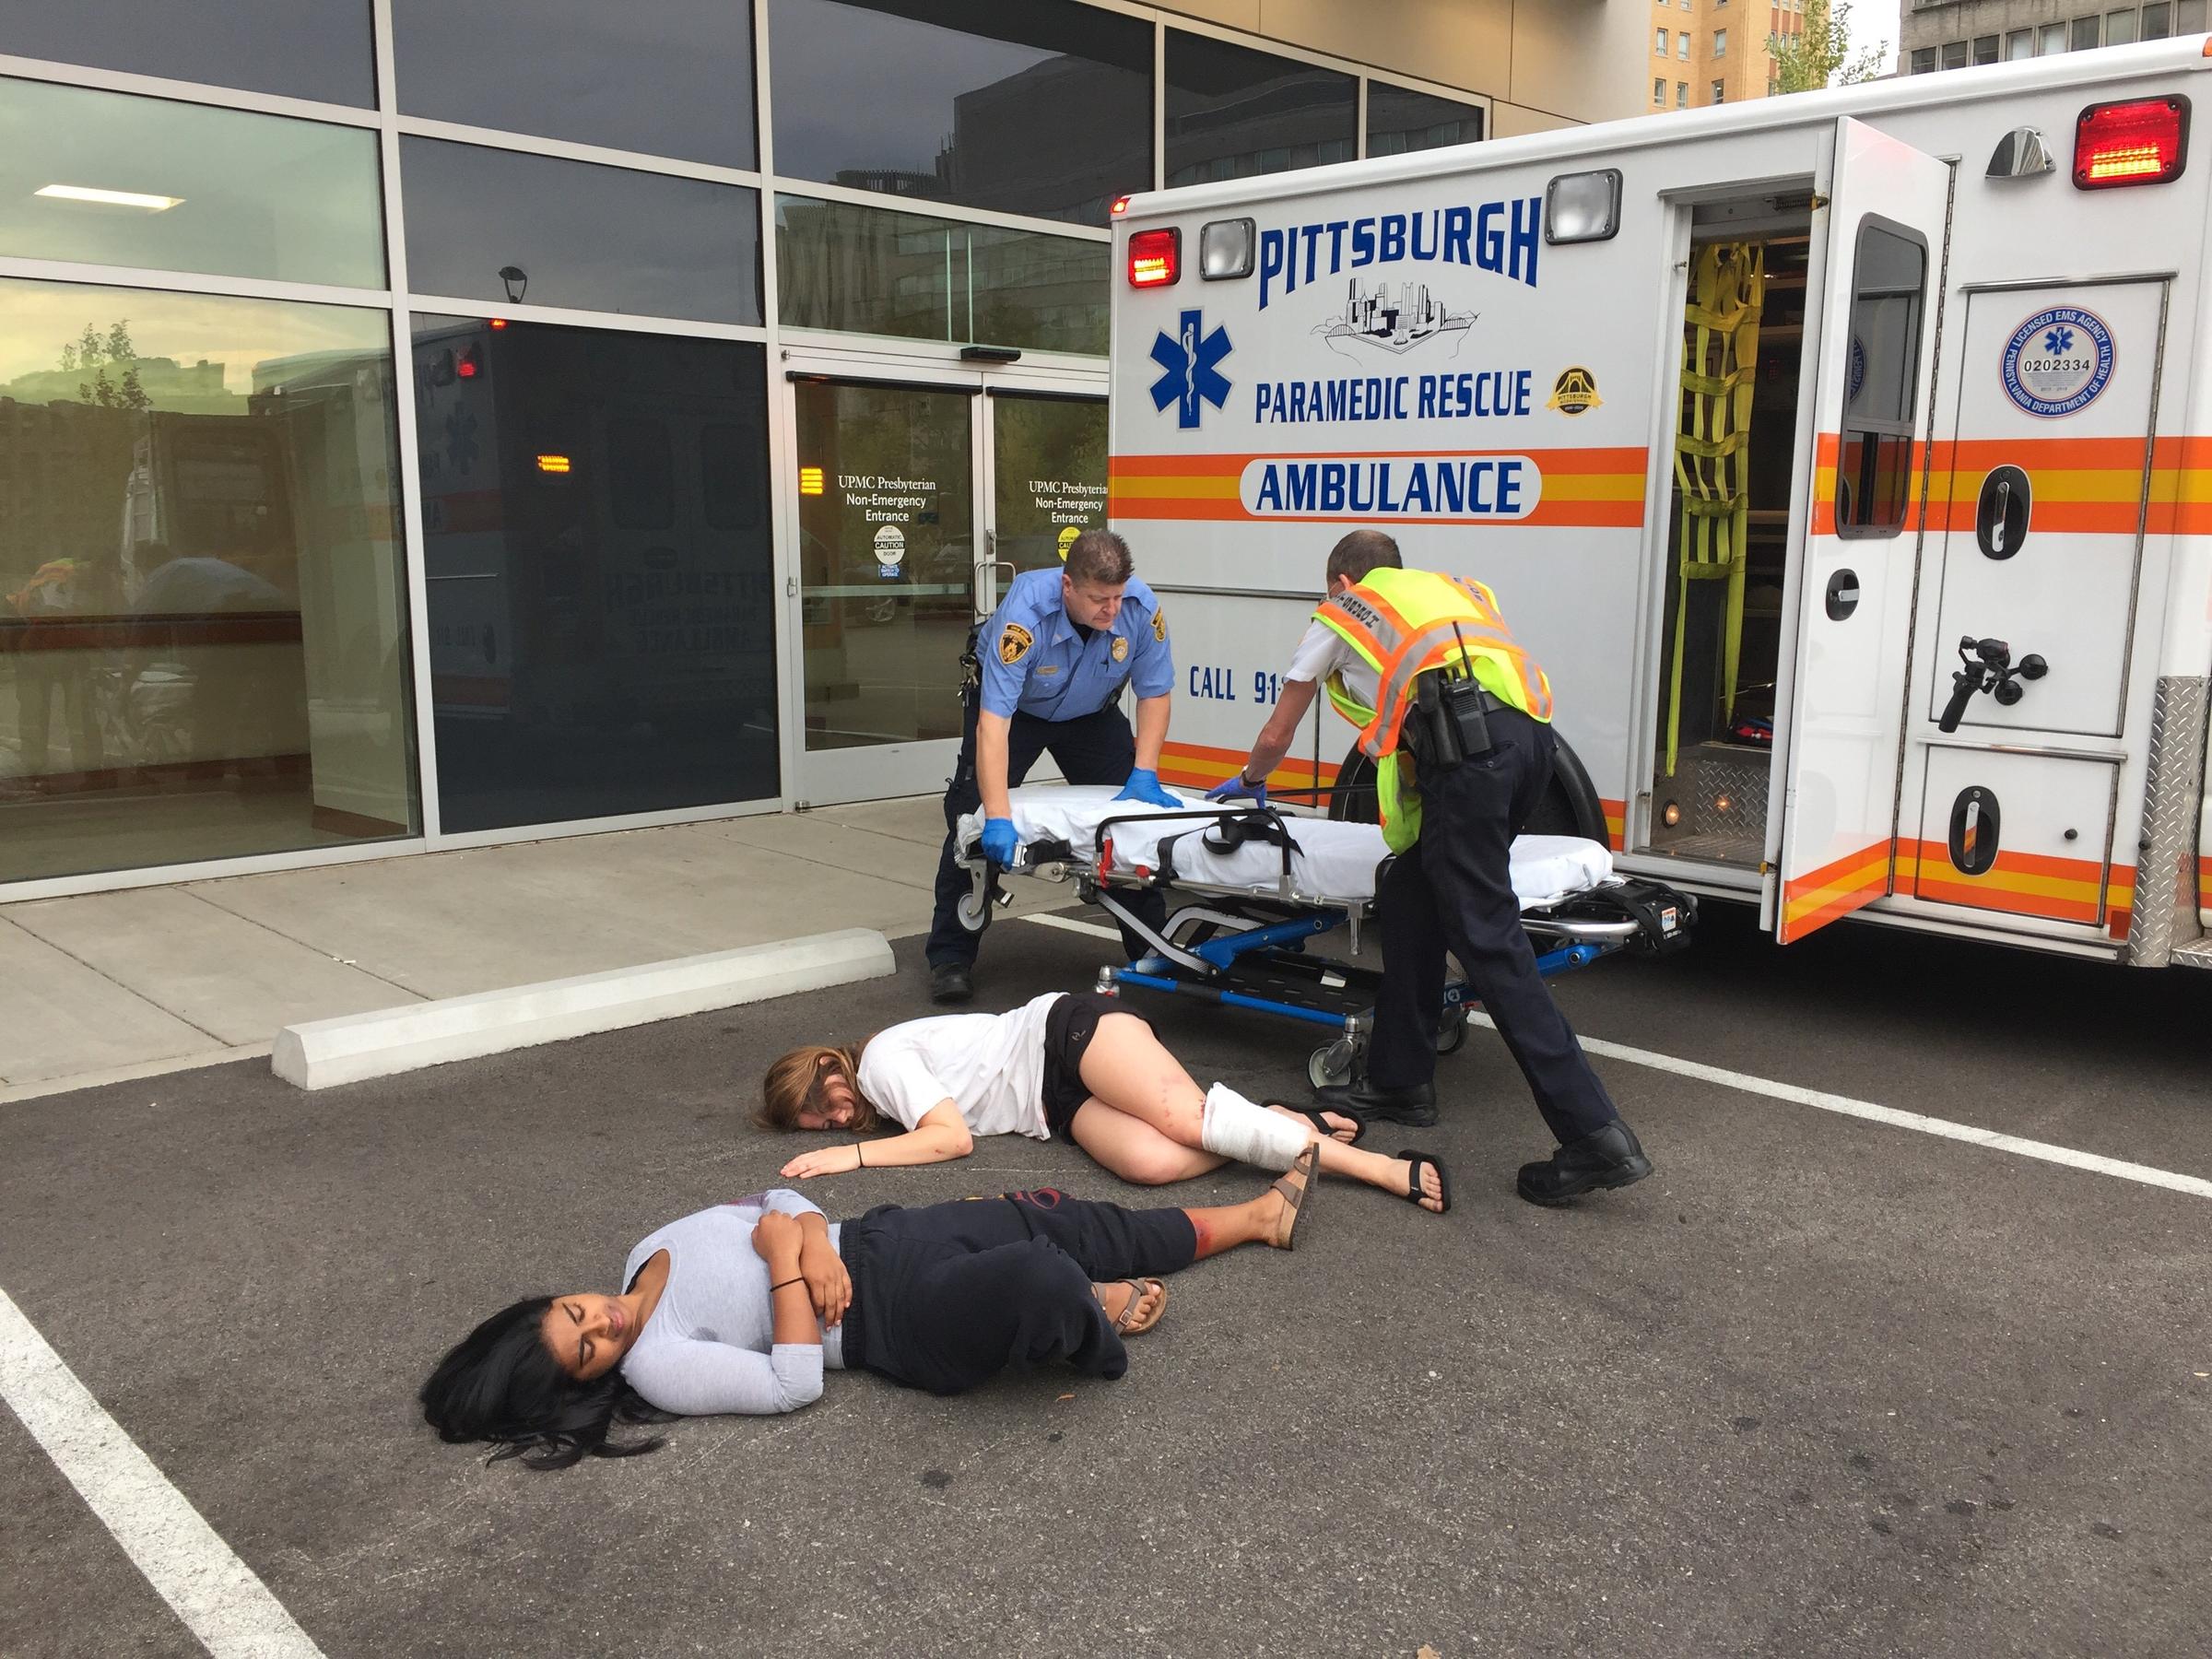 Upmc Presby Holds Emergency Preparedness Drill To Simulate Mass Casualty Event 90 5 Wesa